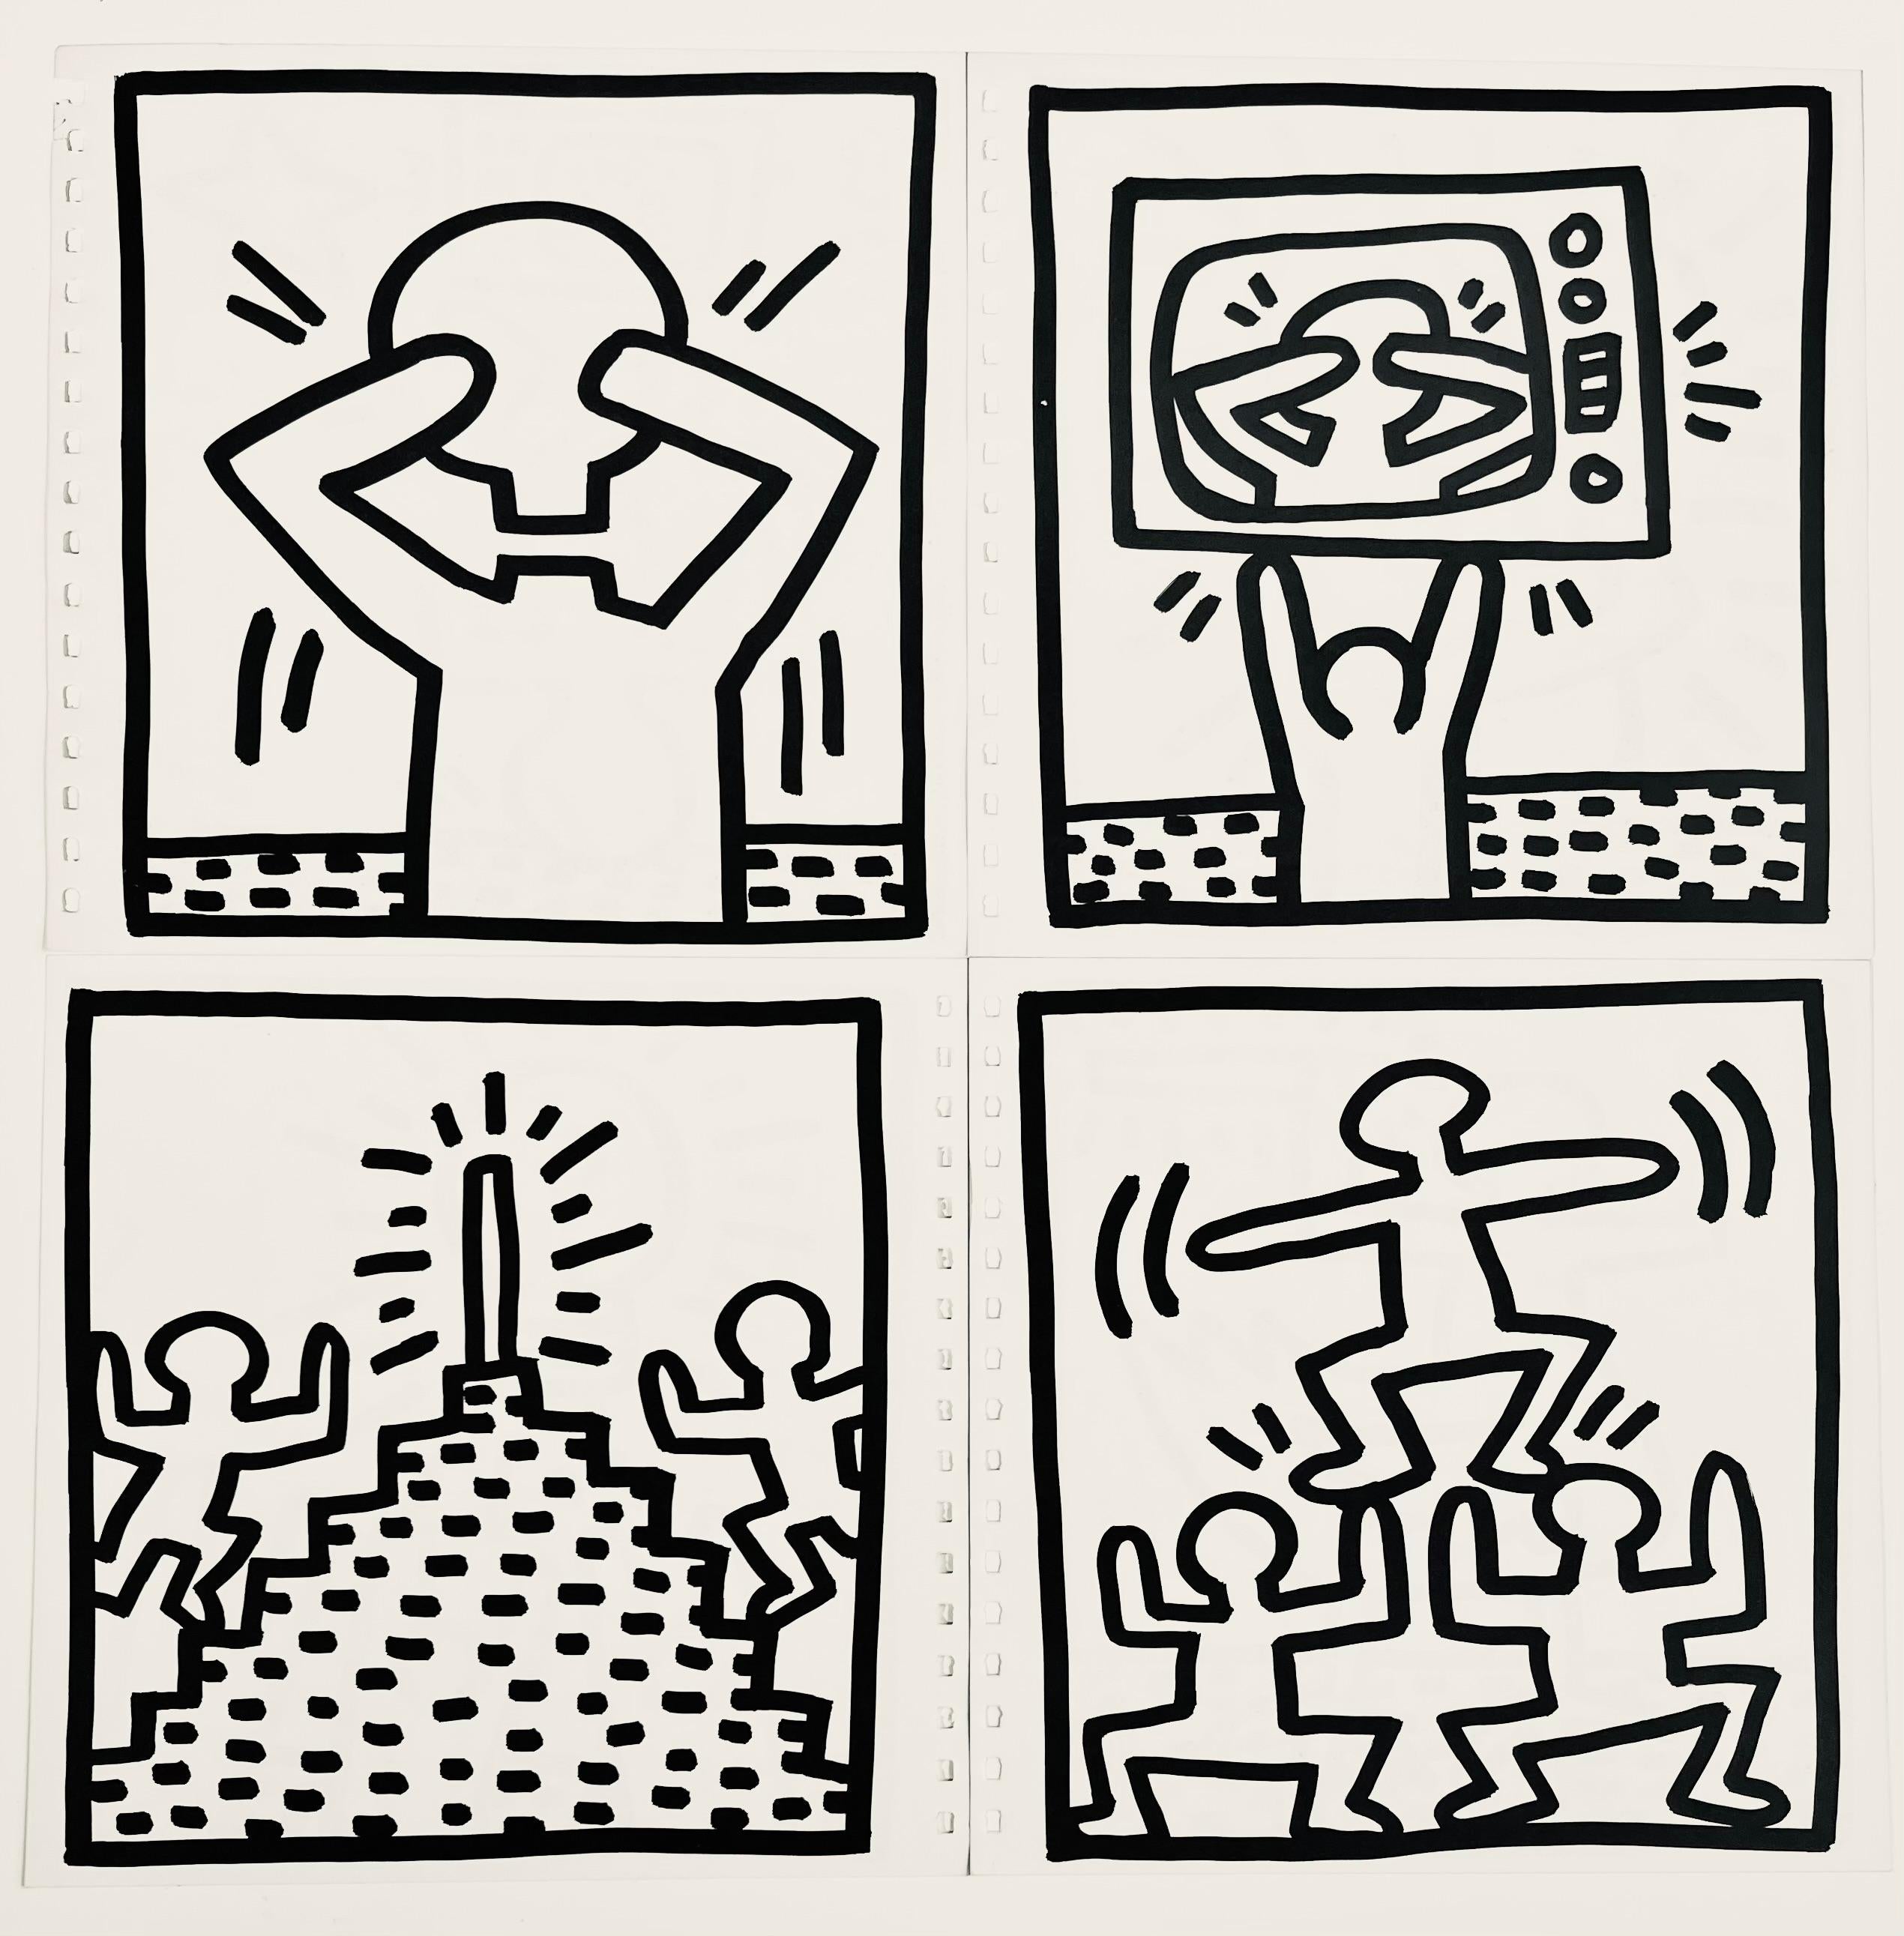 Keith Haring Tony Shafrazi 1982 (set of 4 printed works) - Print by (after) Keith Haring